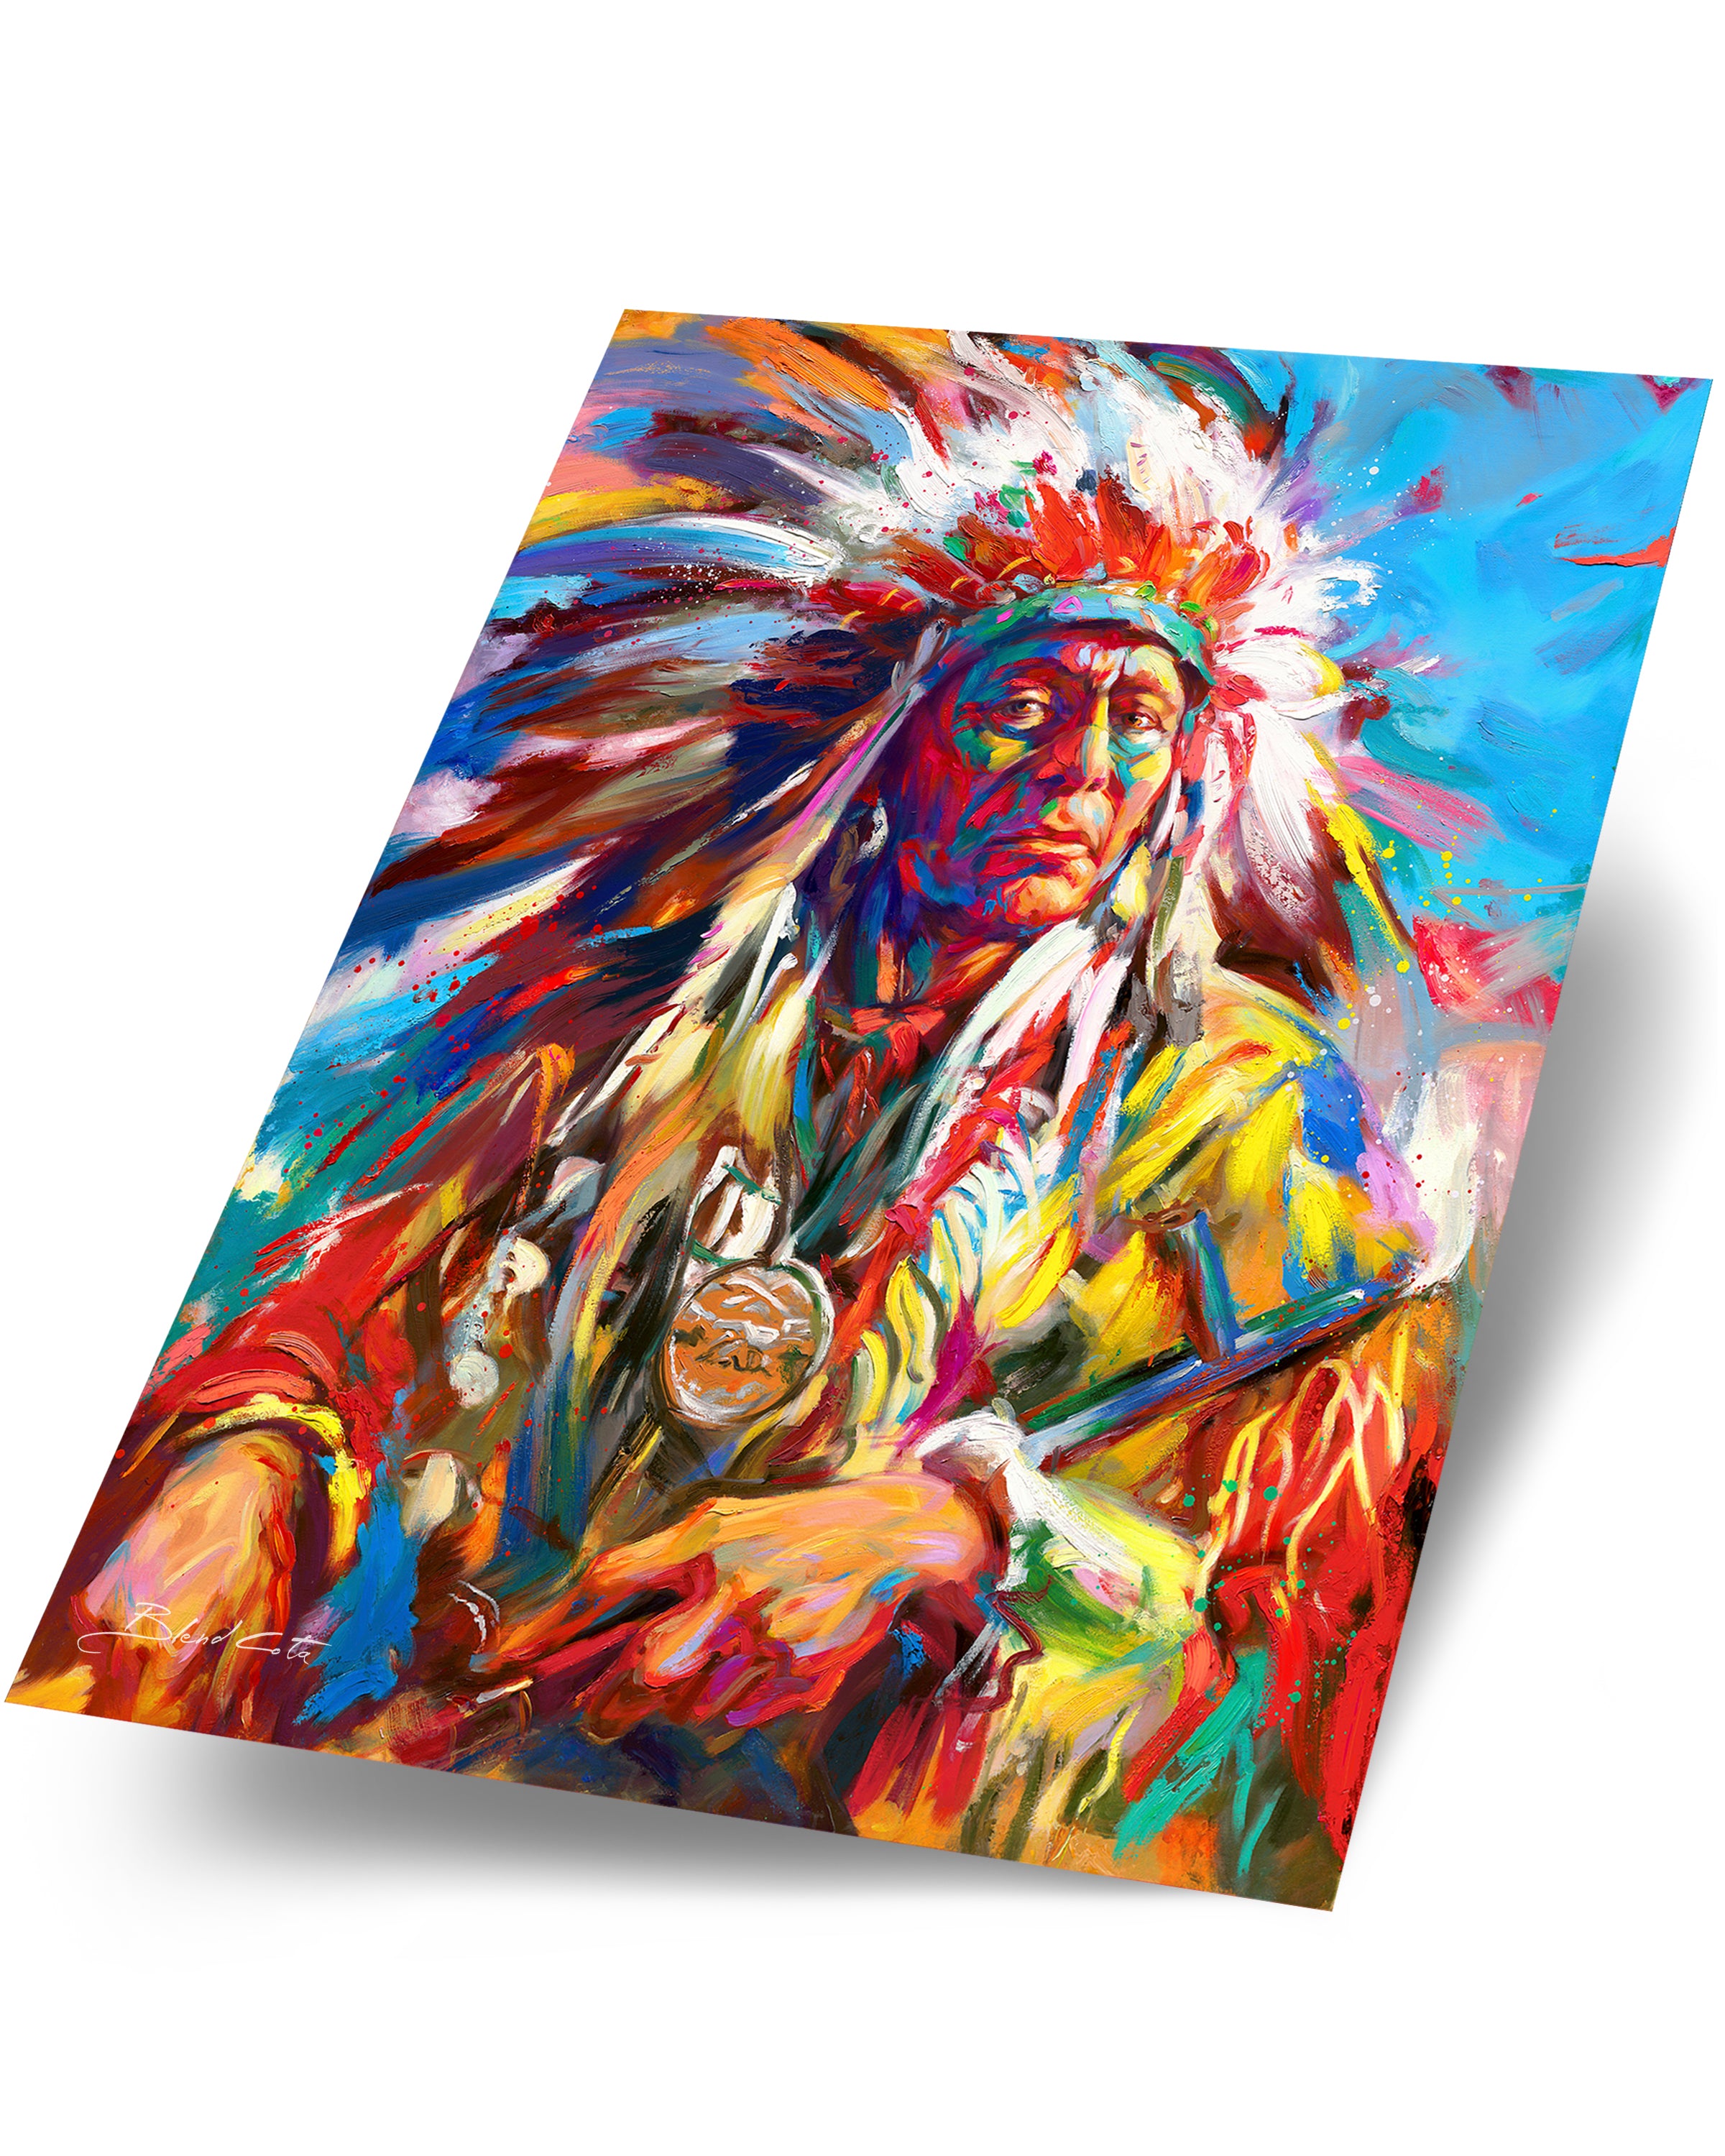 Art print of the Native American Warrior Portrait in war bonnet, symoblizing the Great Spirit, pride and power, in colorful brushstrokes, color expressionism style.